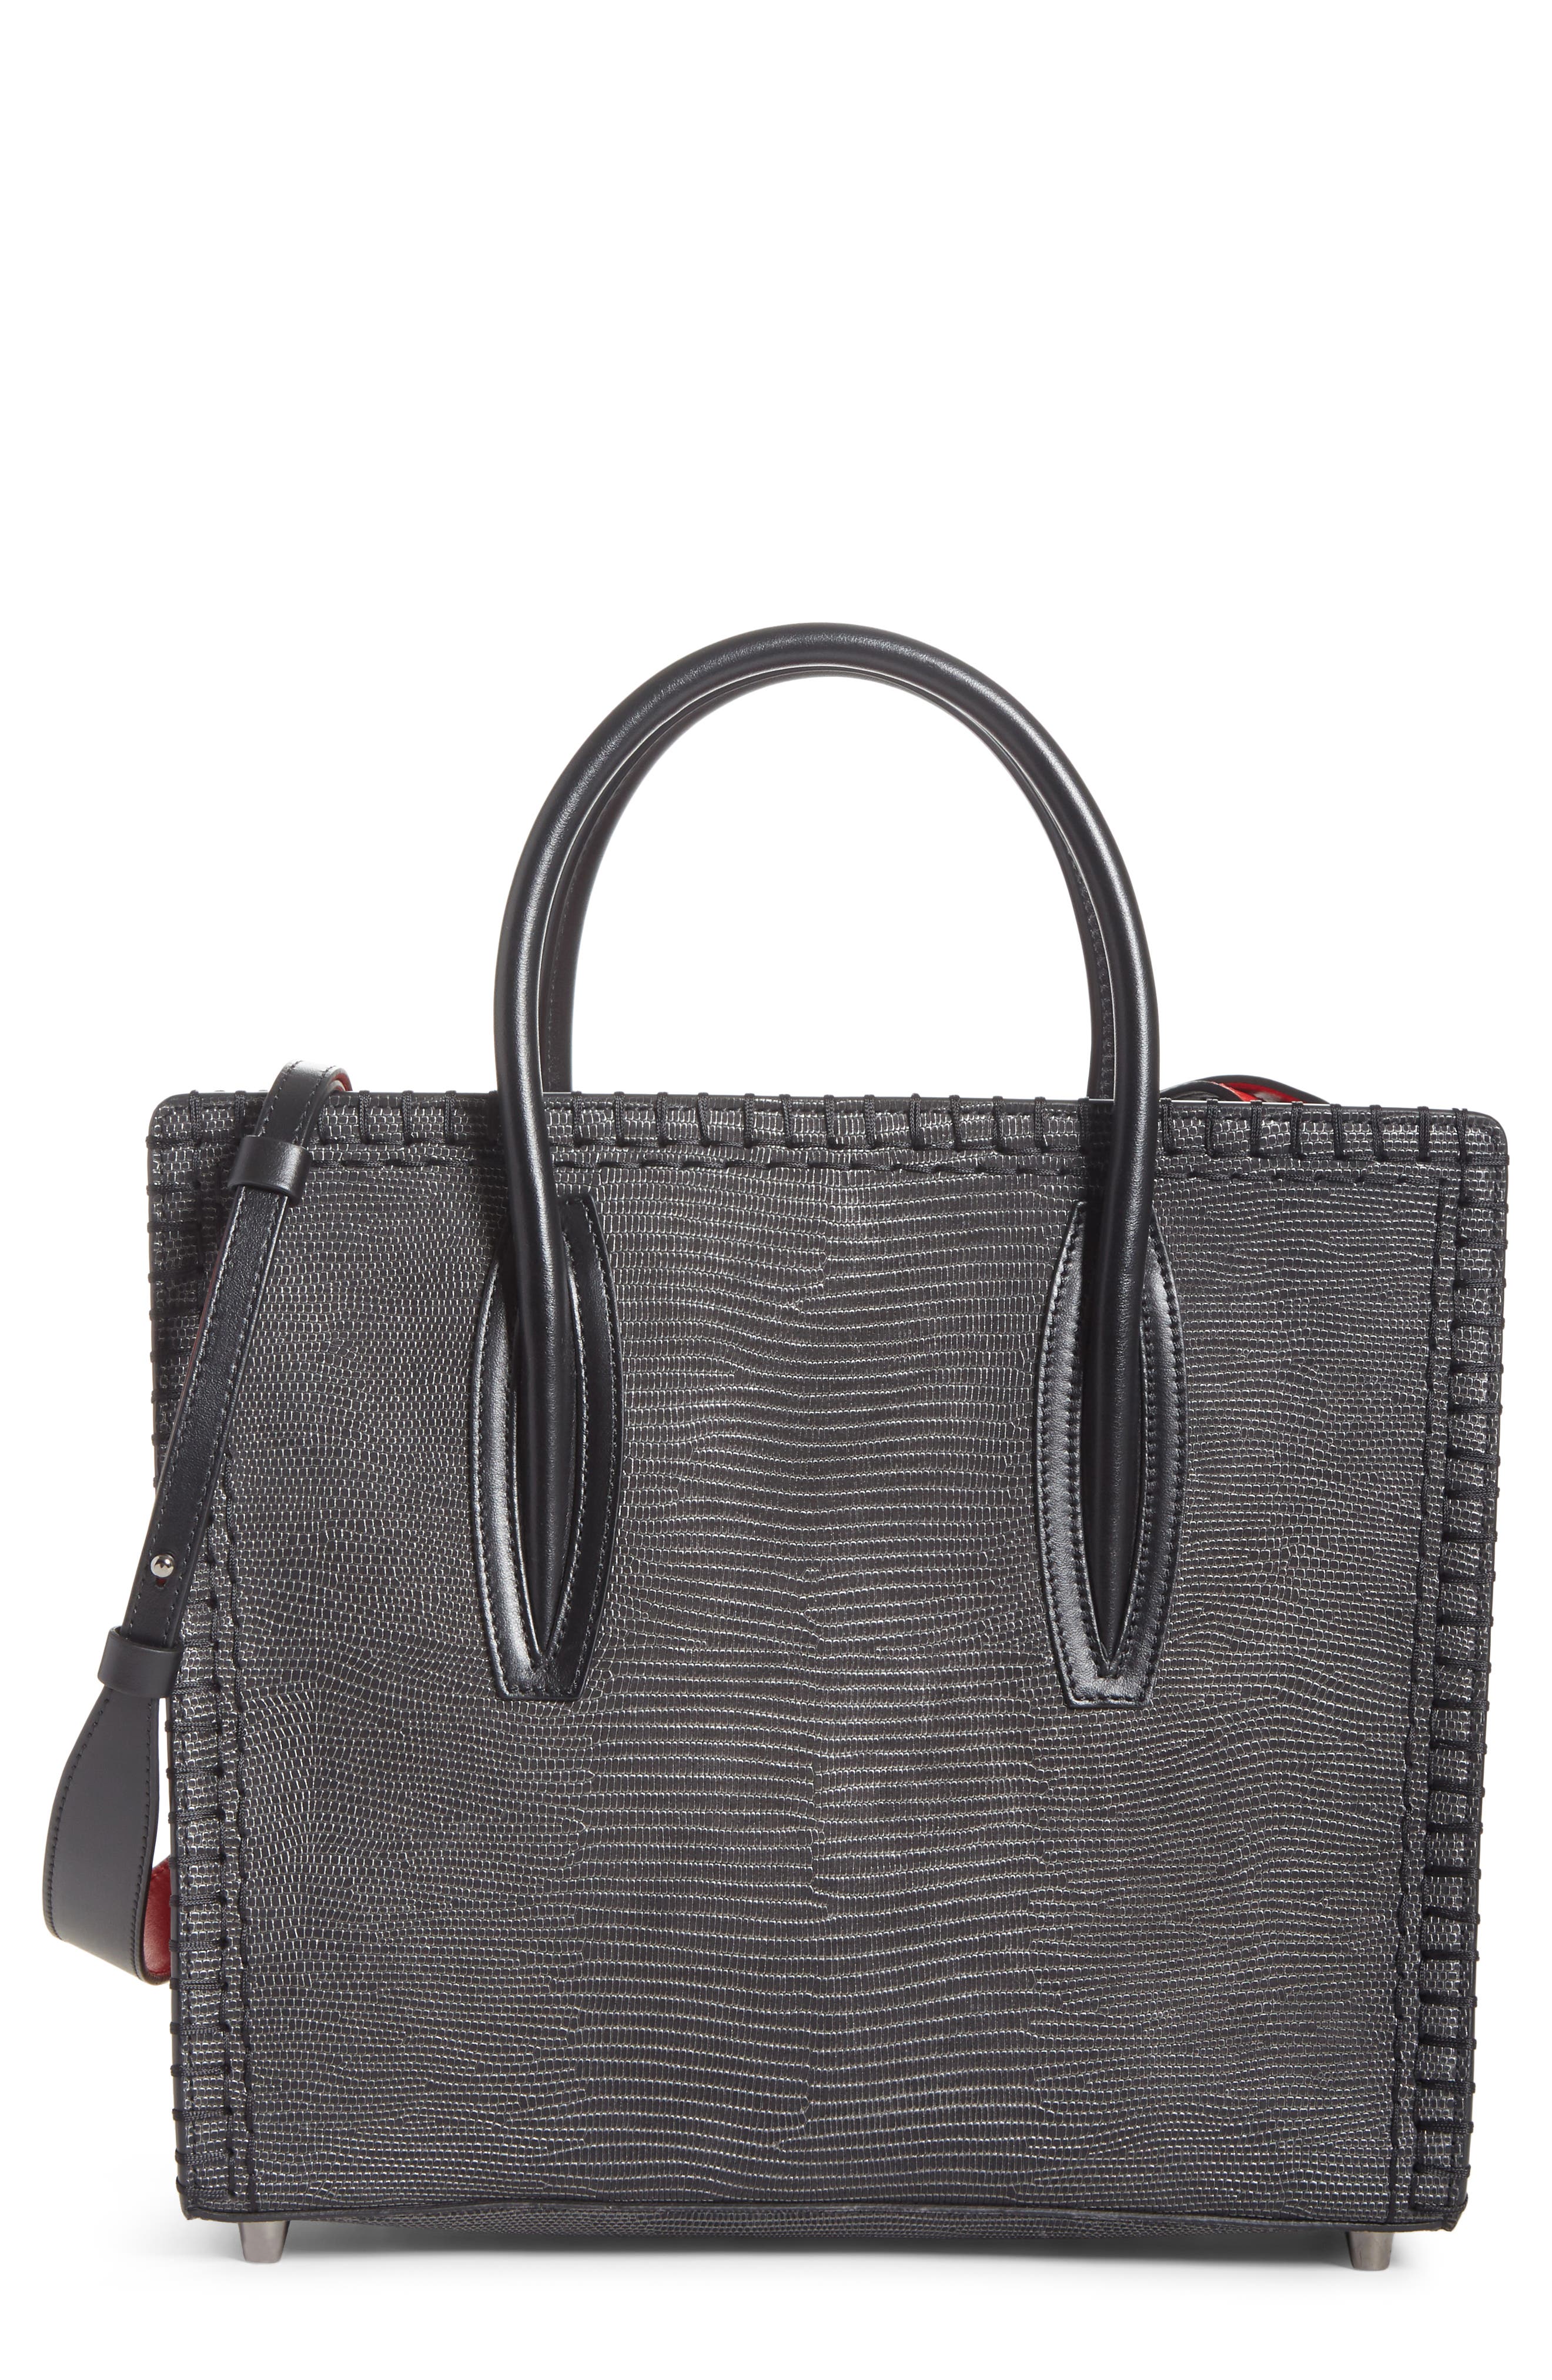 louboutin bags nordstrom